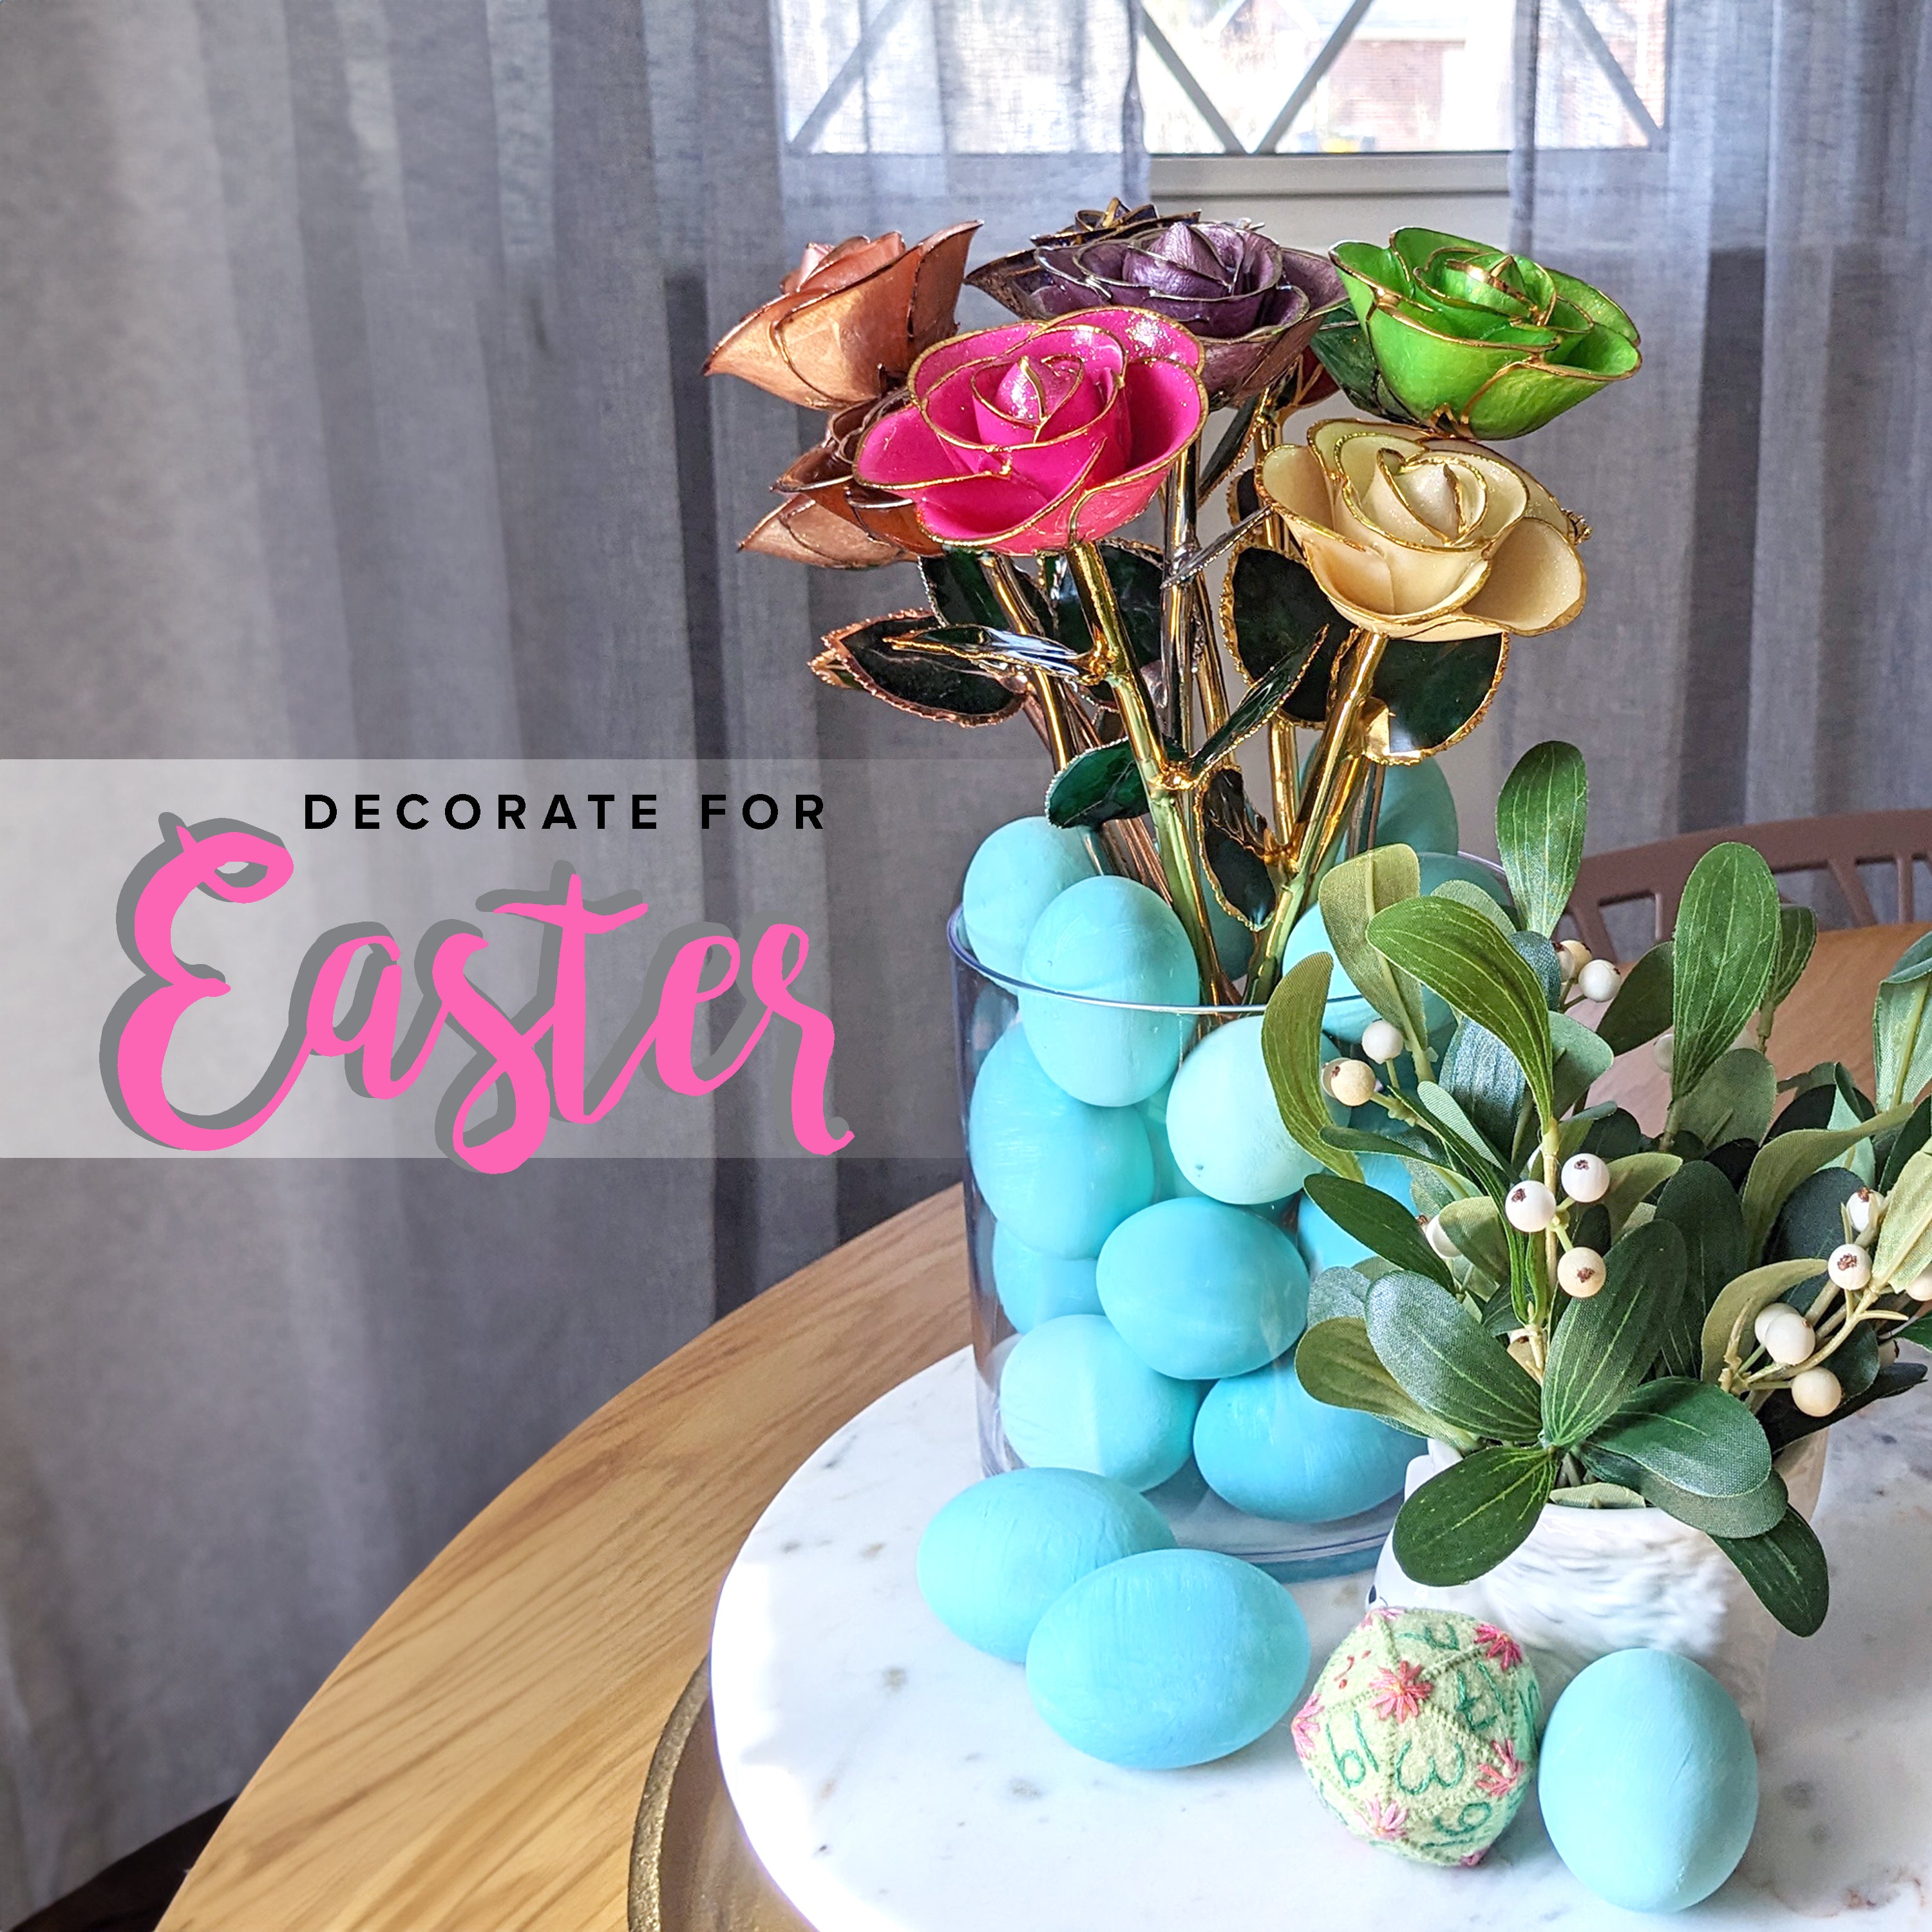 Decorate for Easter with Gold Dipped Roses